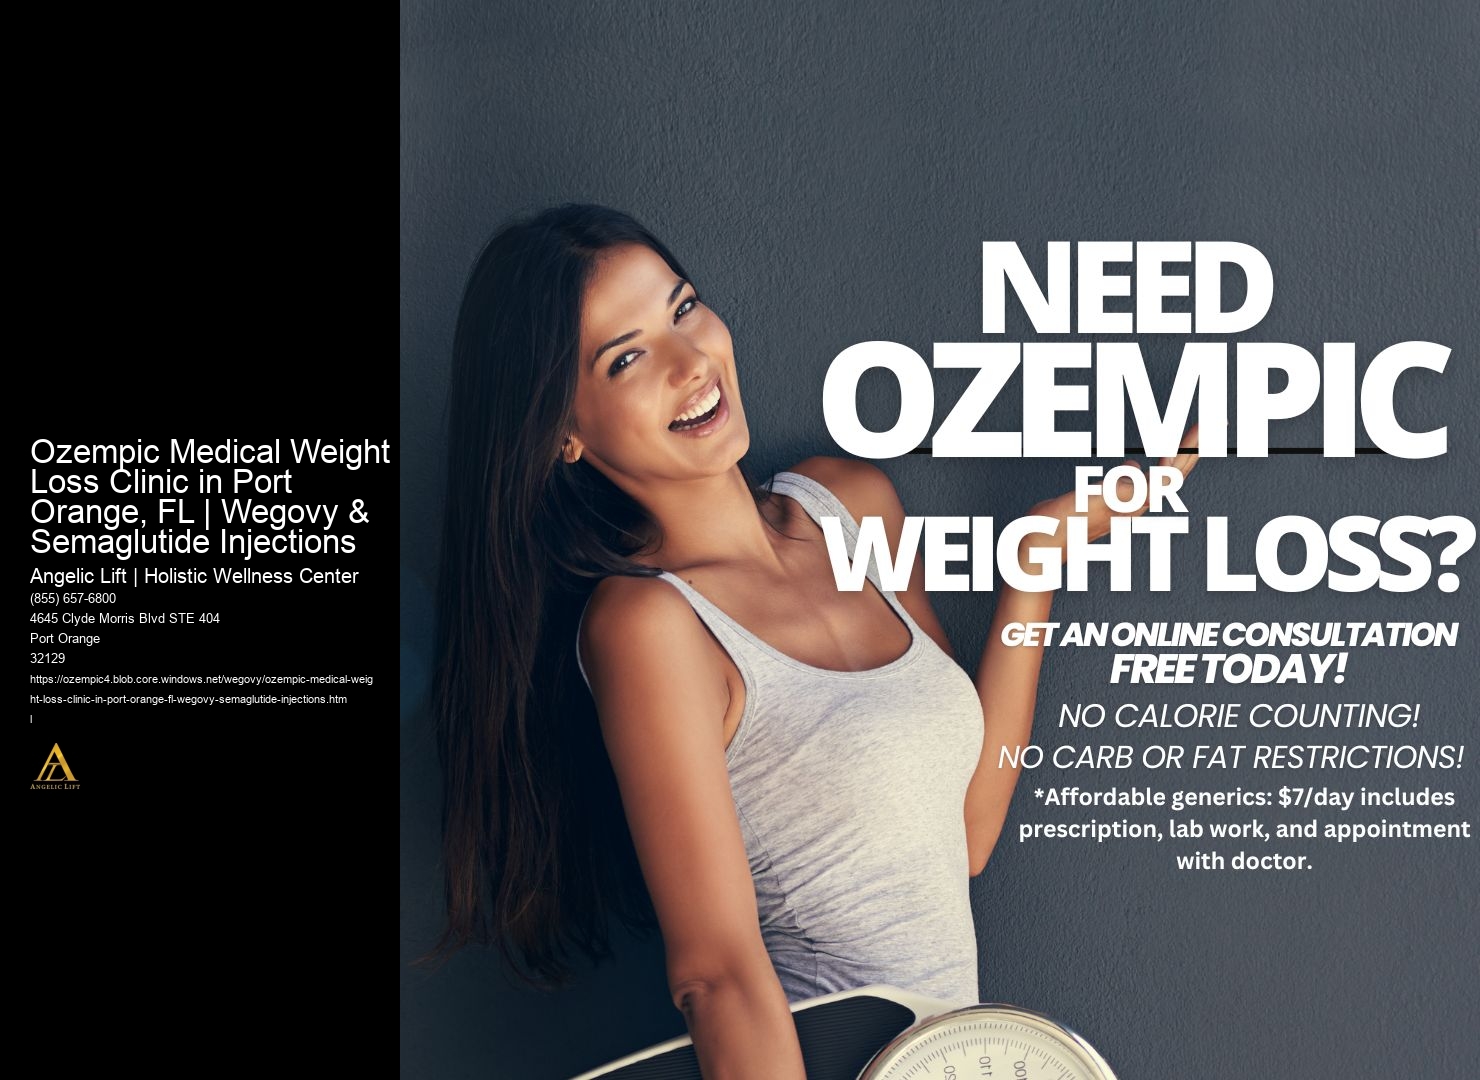 Ozempic Medical Weight Loss Clinic in Port Orange, FL | Wegovy & Semaglutide Injections